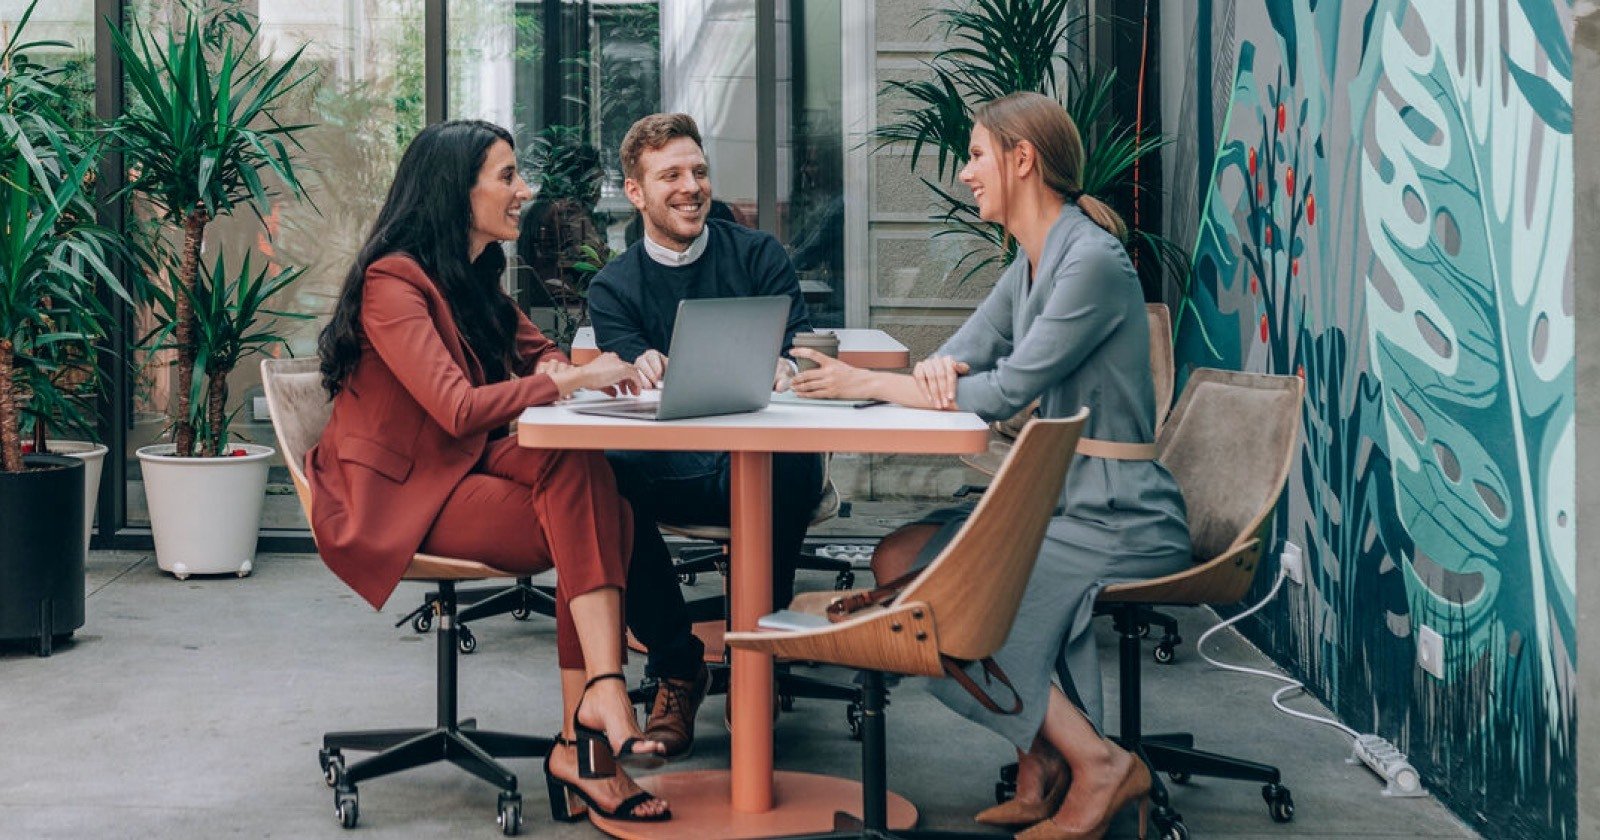 Three People Seated in Stylish Office Smiling and Having a Conversation Around a Table